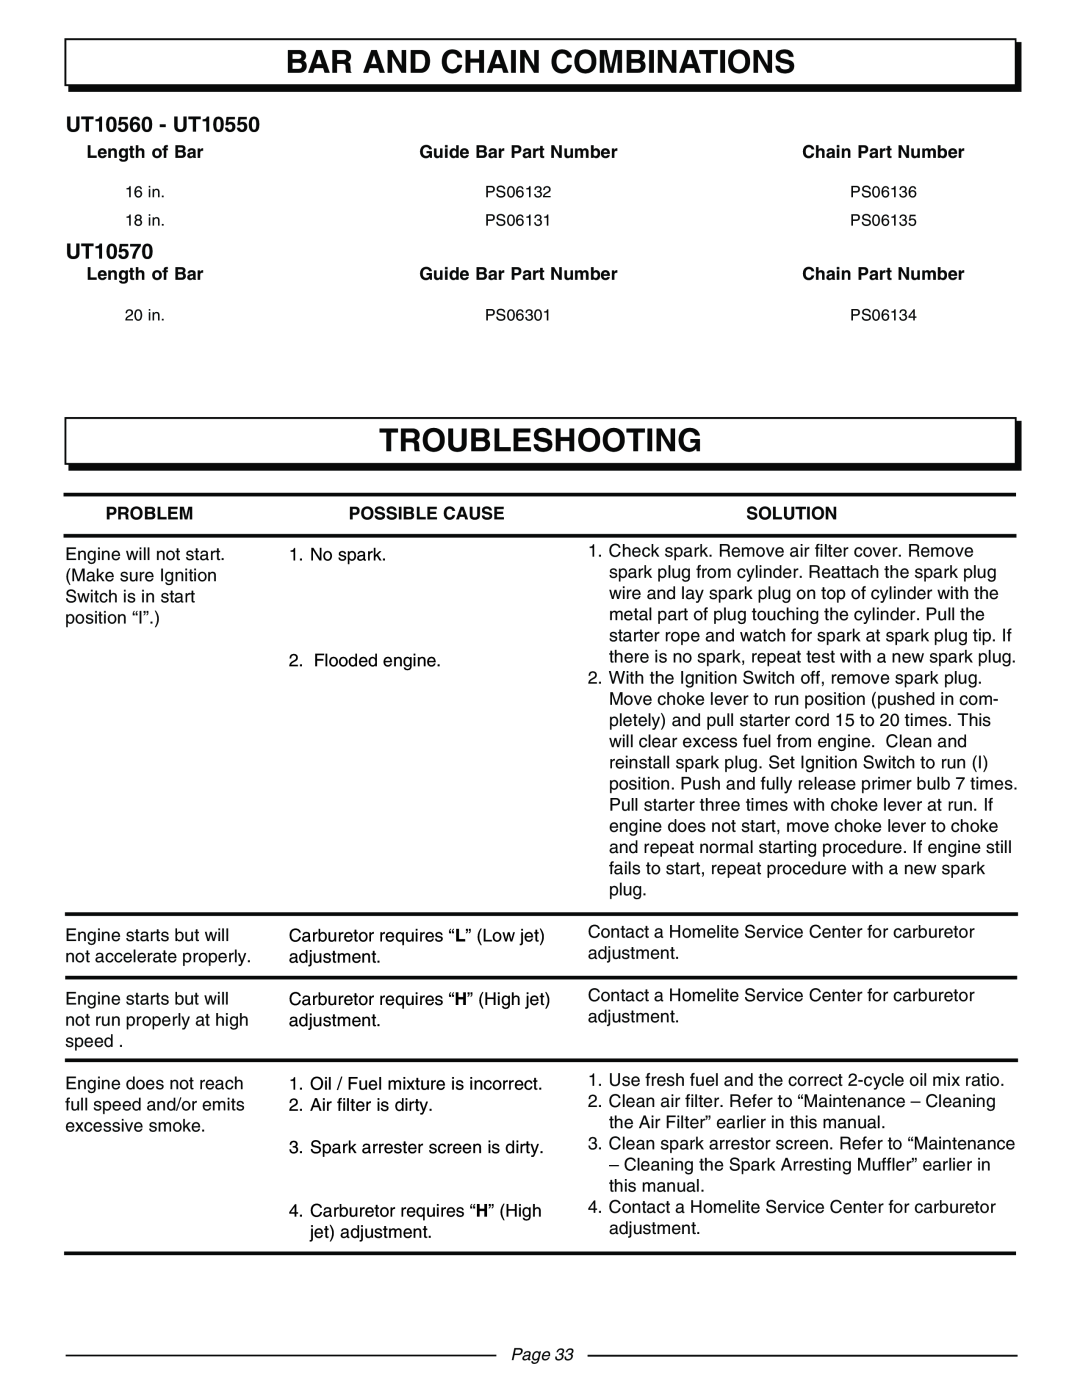 Homelite UT10570 manual Bar And Chain Combinations, Troubleshooting, UT10560 - UT10550, Page 